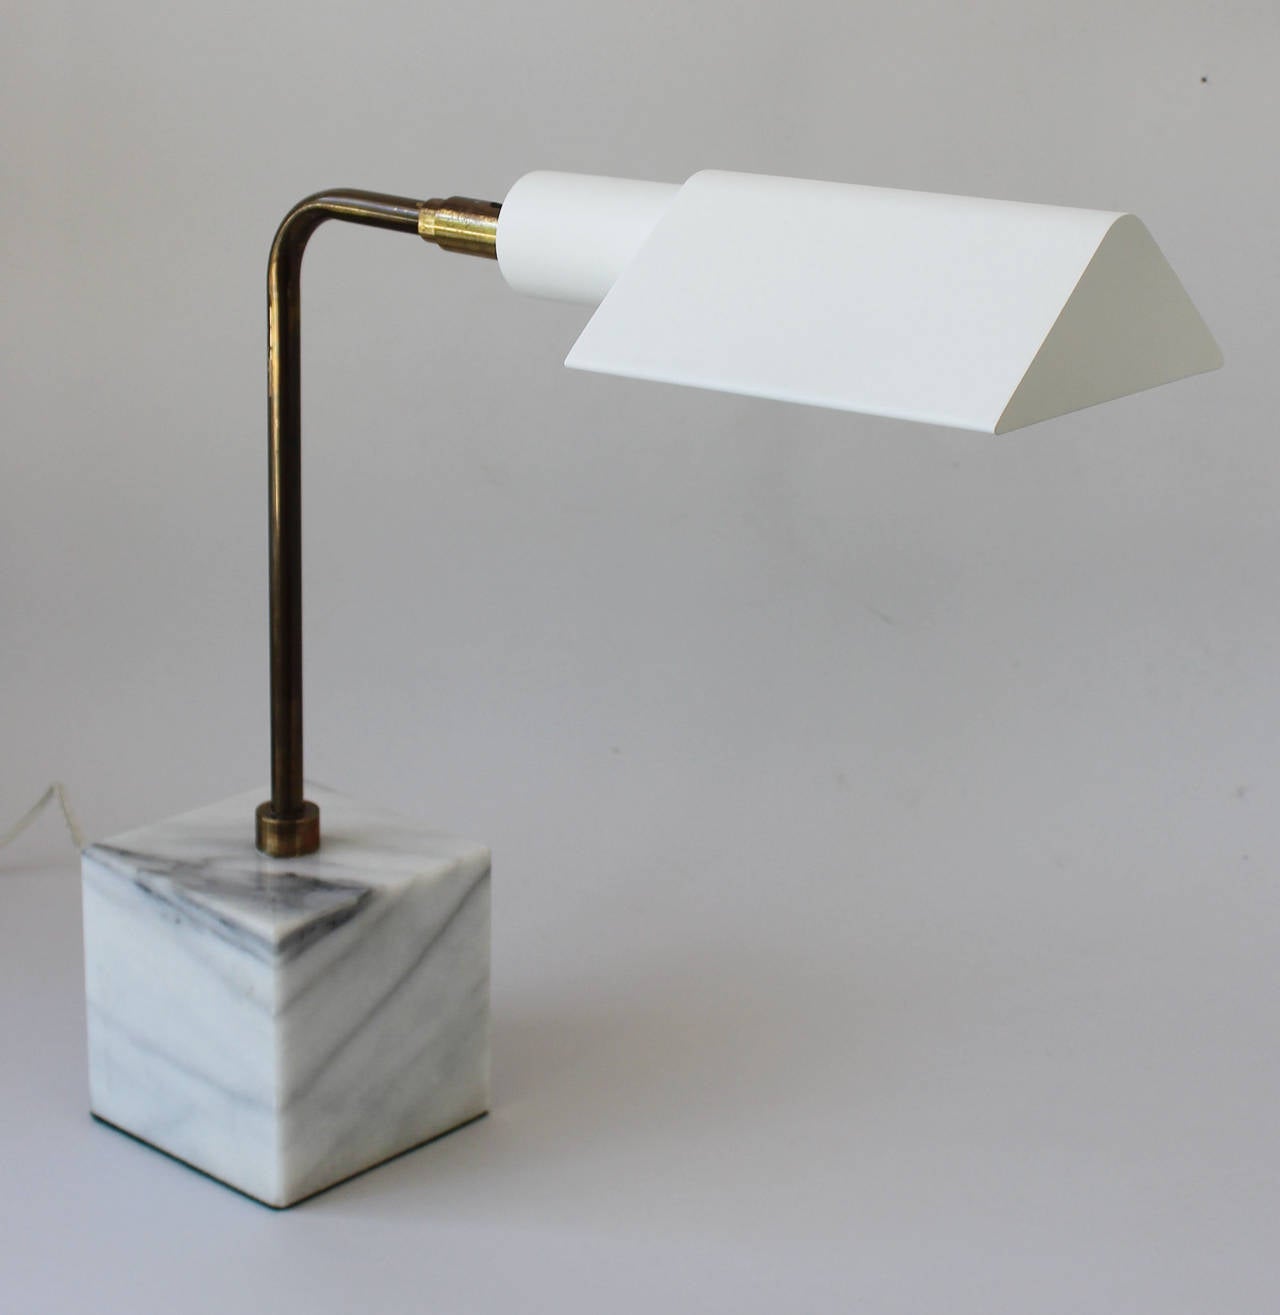 A patinaed brass and powder coated aluminum articulating desk lamp with marble base by Koch and Lowy.

complementary delivery within 30 miles.